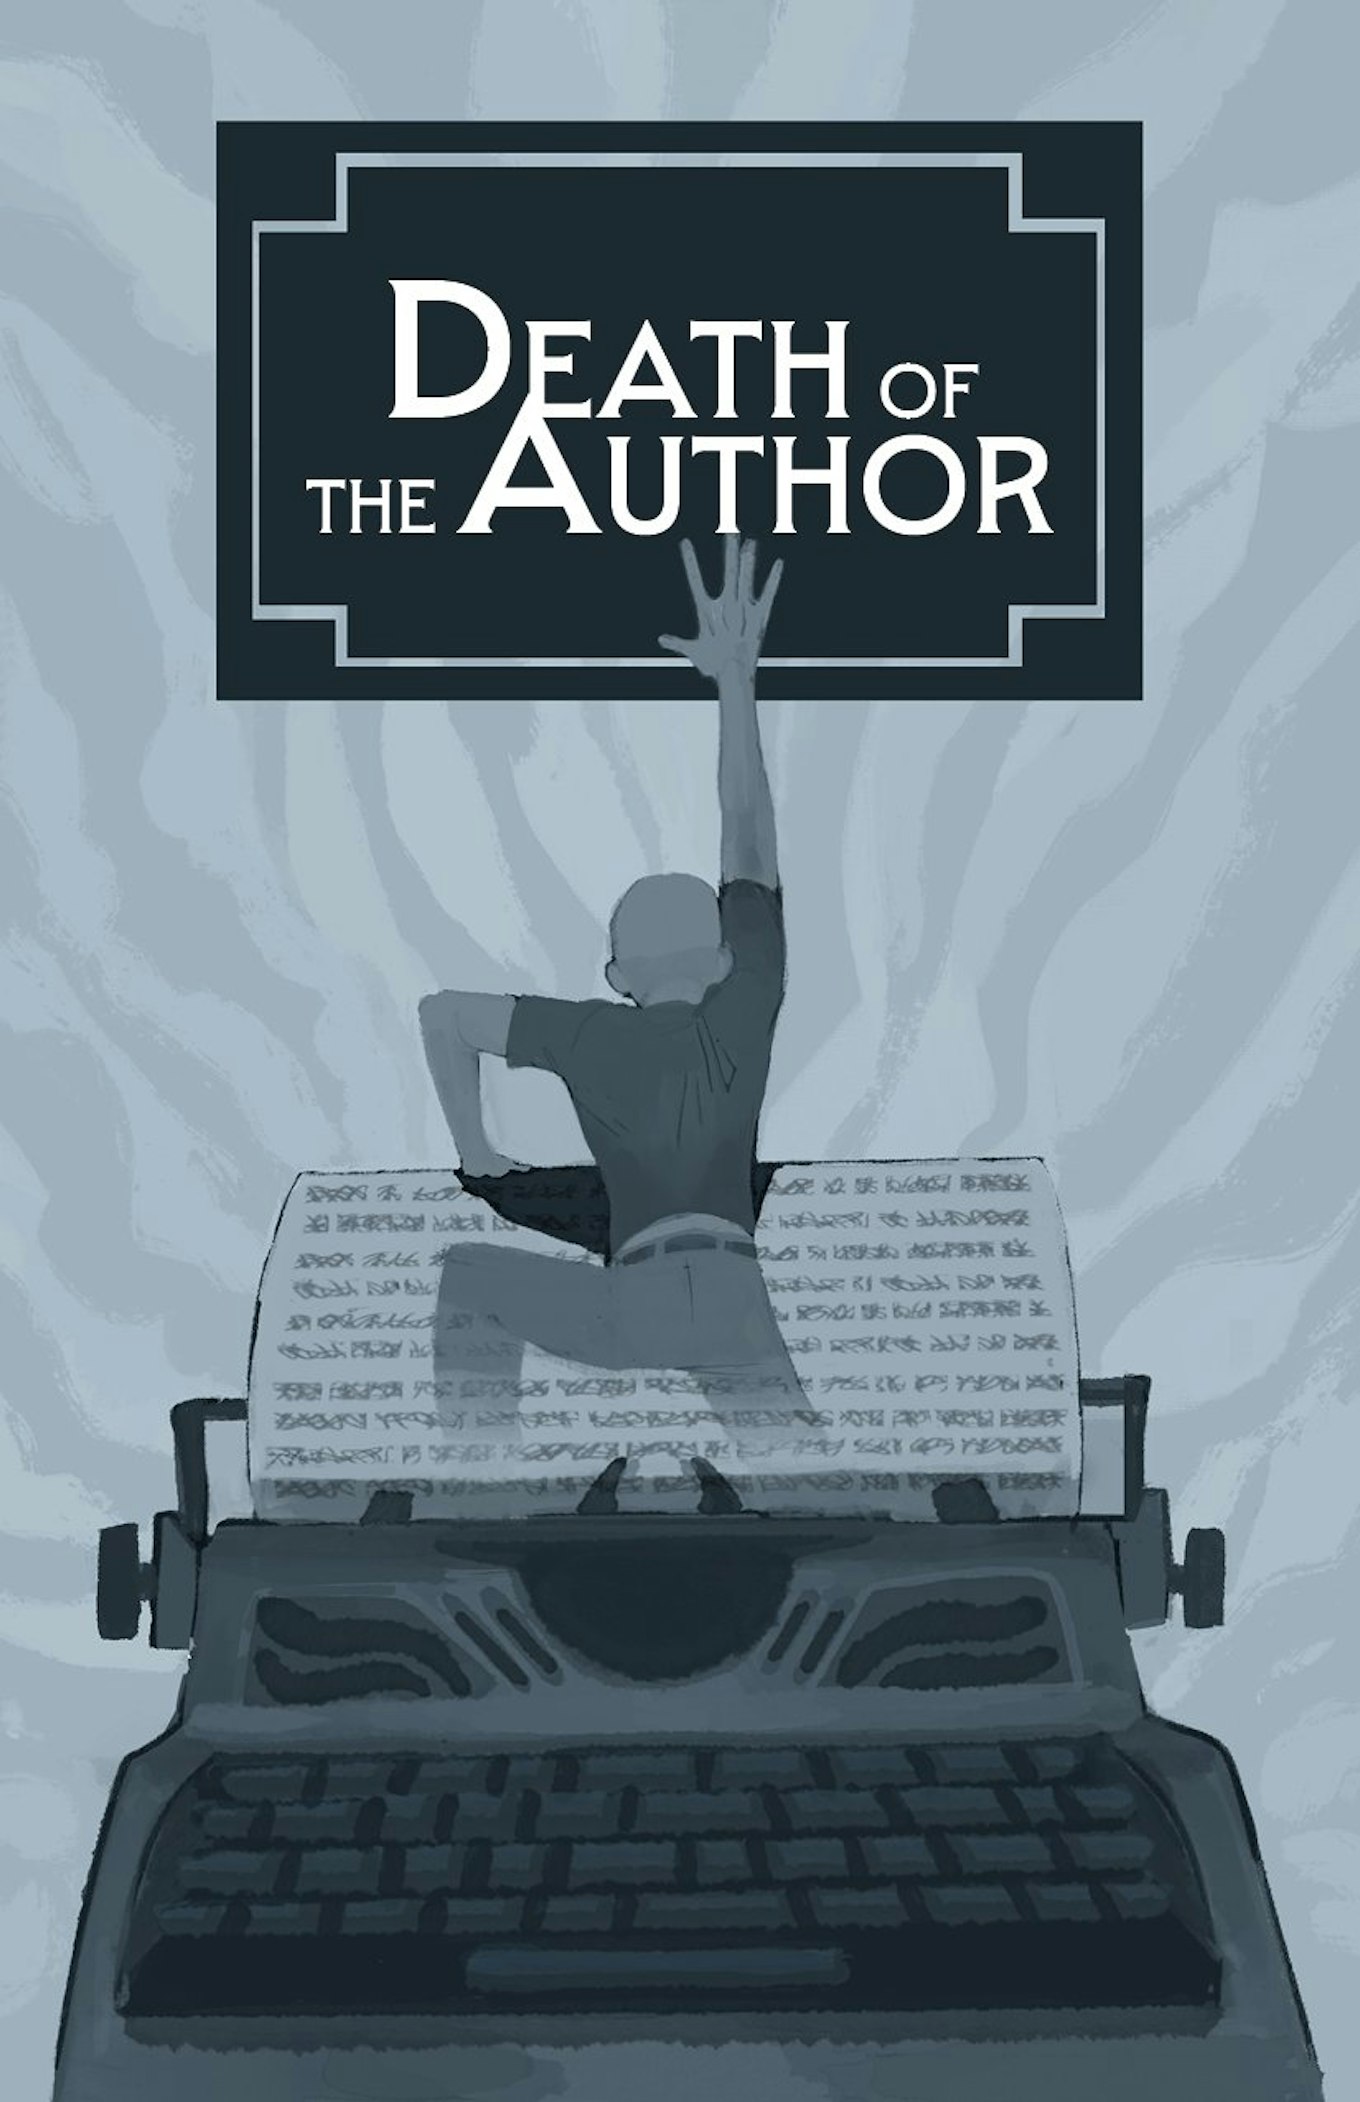 The cover art for Death of the Author. Shows a person climbing out of a typewritten page on a typewriter. Their legs appear to be fading into the text on the page. The character's back is facing the viewer, and their right hand reaches up towards the sky. The title text, "Death of the Author, is written in white and set into a dark-blue bookplate. The entire cover is in shades of blue gray.